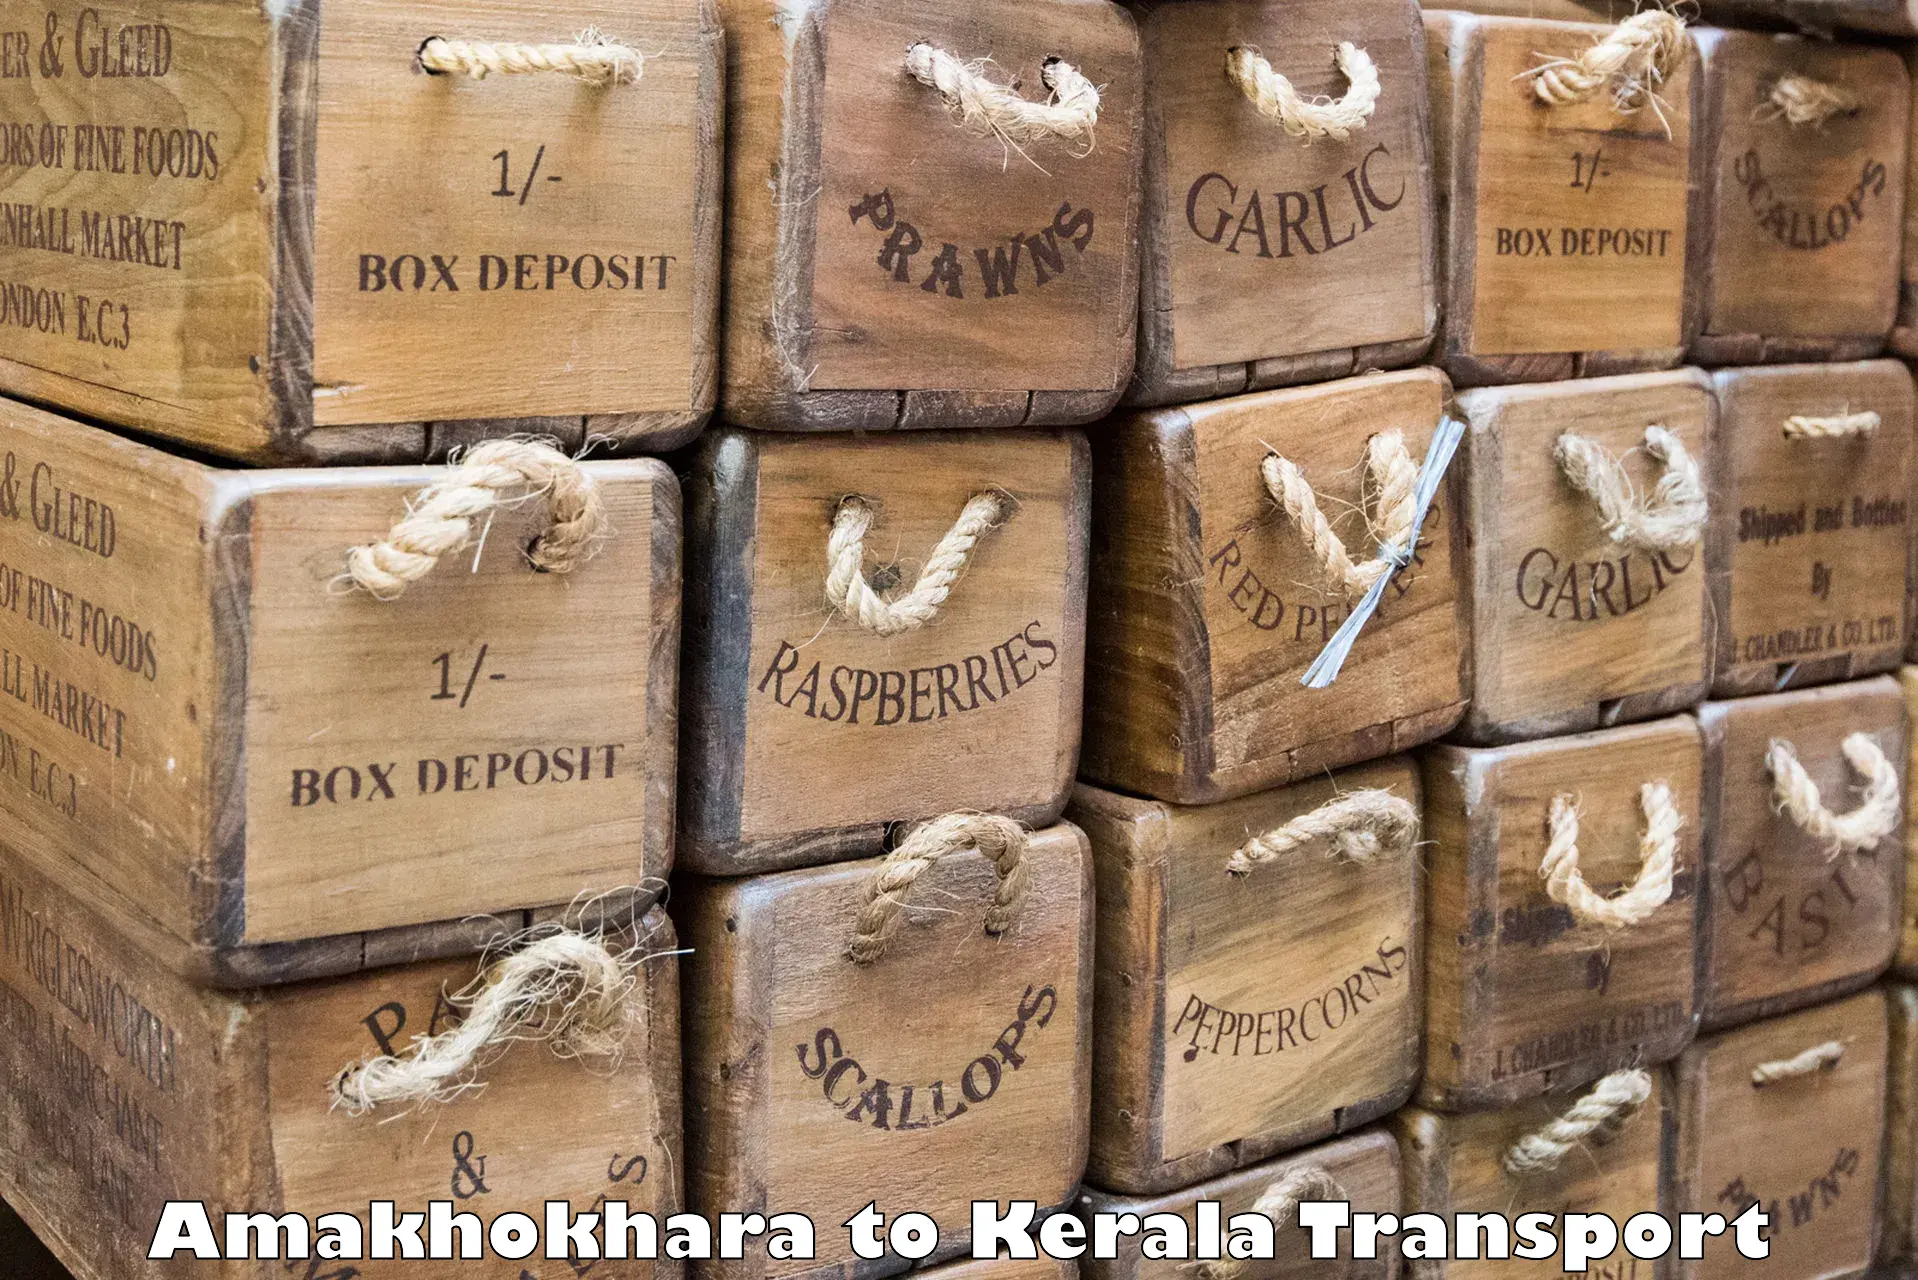 Truck transport companies in India Amakhokhara to Munnar